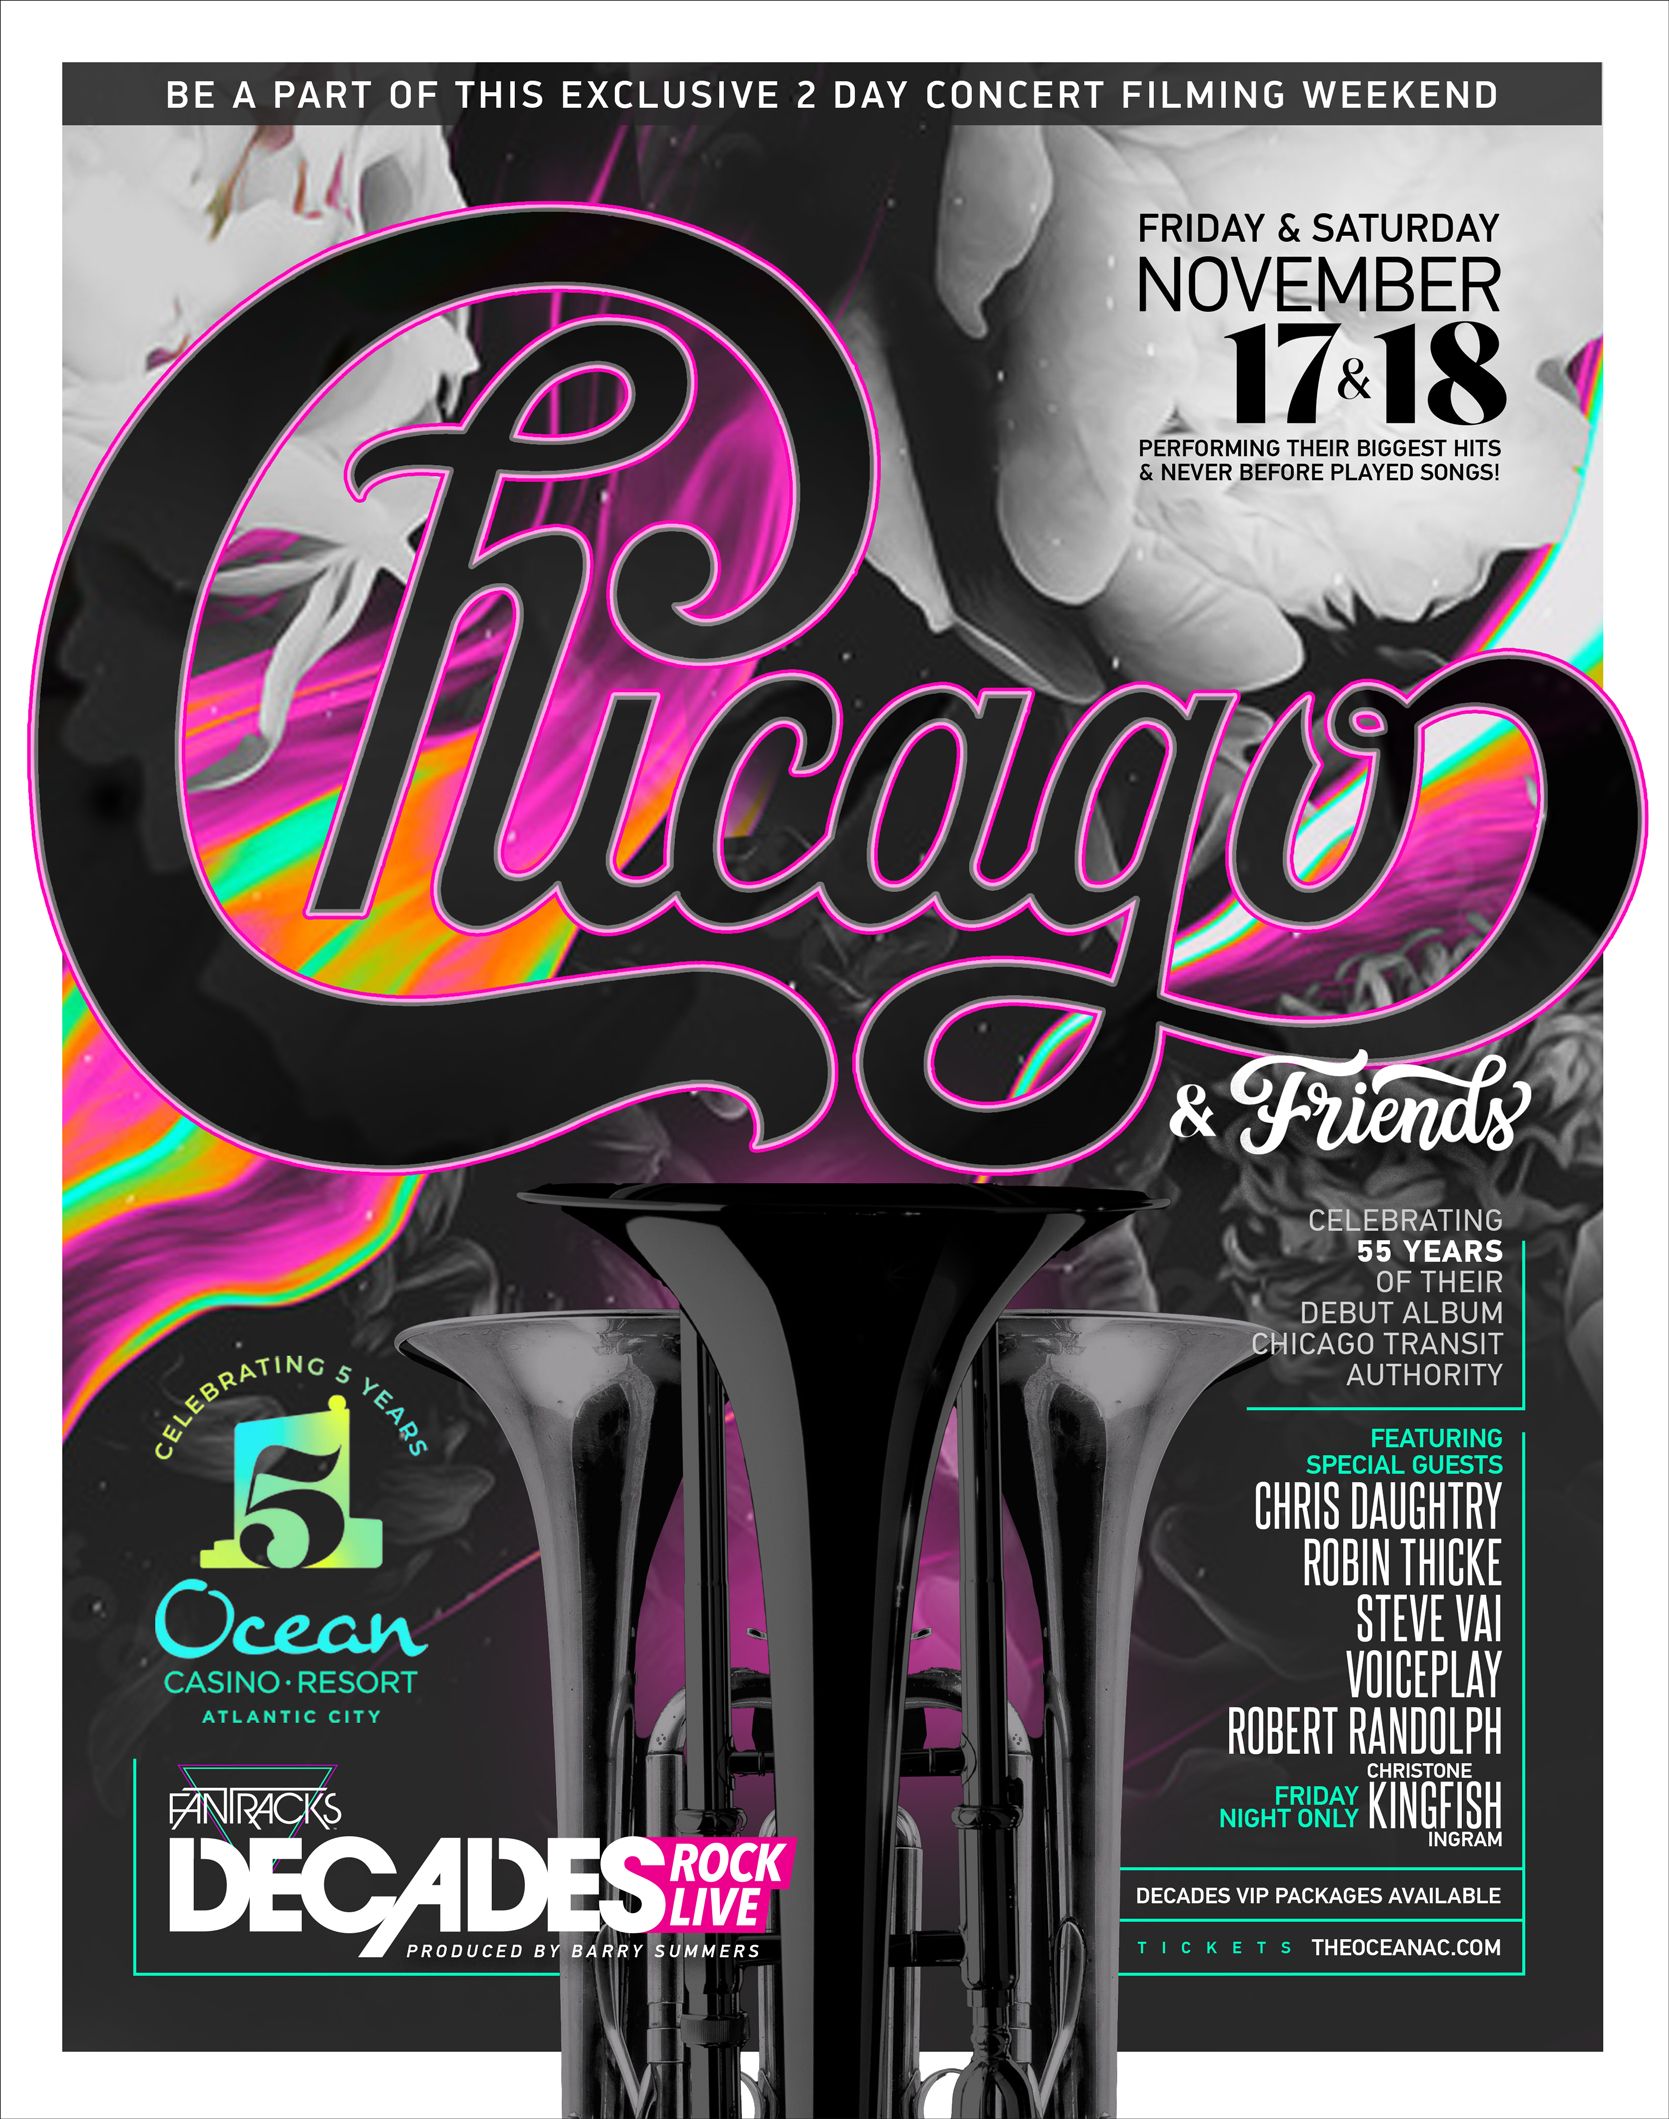 “CHICAGO & FRIENDS” PRODUCED BY DECADES ROCK LIVE ANNOUNCES NEW SPECIAL GUESTS, ROBERT RANDOLPH, CHRISTONE “KINGFISH” INGRAM, VoicePlay